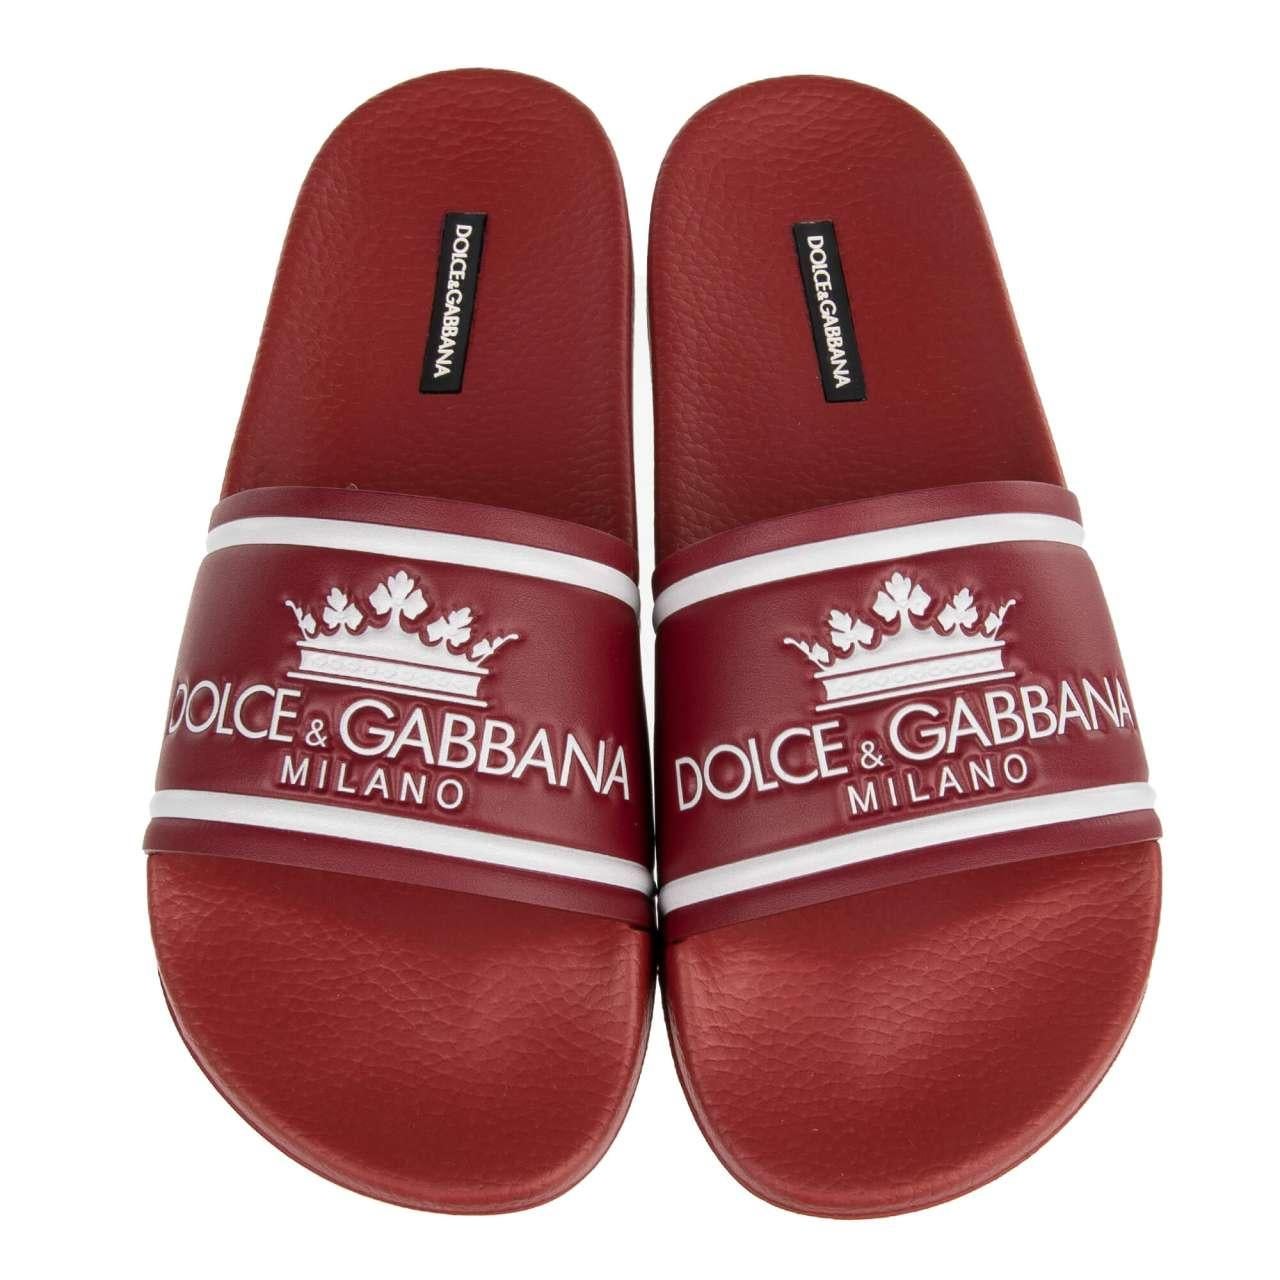 - Leather sandals CIABATTA with rubber sole and DG Crown Logo in red and white by DOLCE & GABBANA - MADE IN ITALY - New with Box - Model: CS1630-AU679-HPR18 - Material: 100% Calfskin - Sole: Rubber - Color: Red / White - Rubber sole - Sizes (appr.